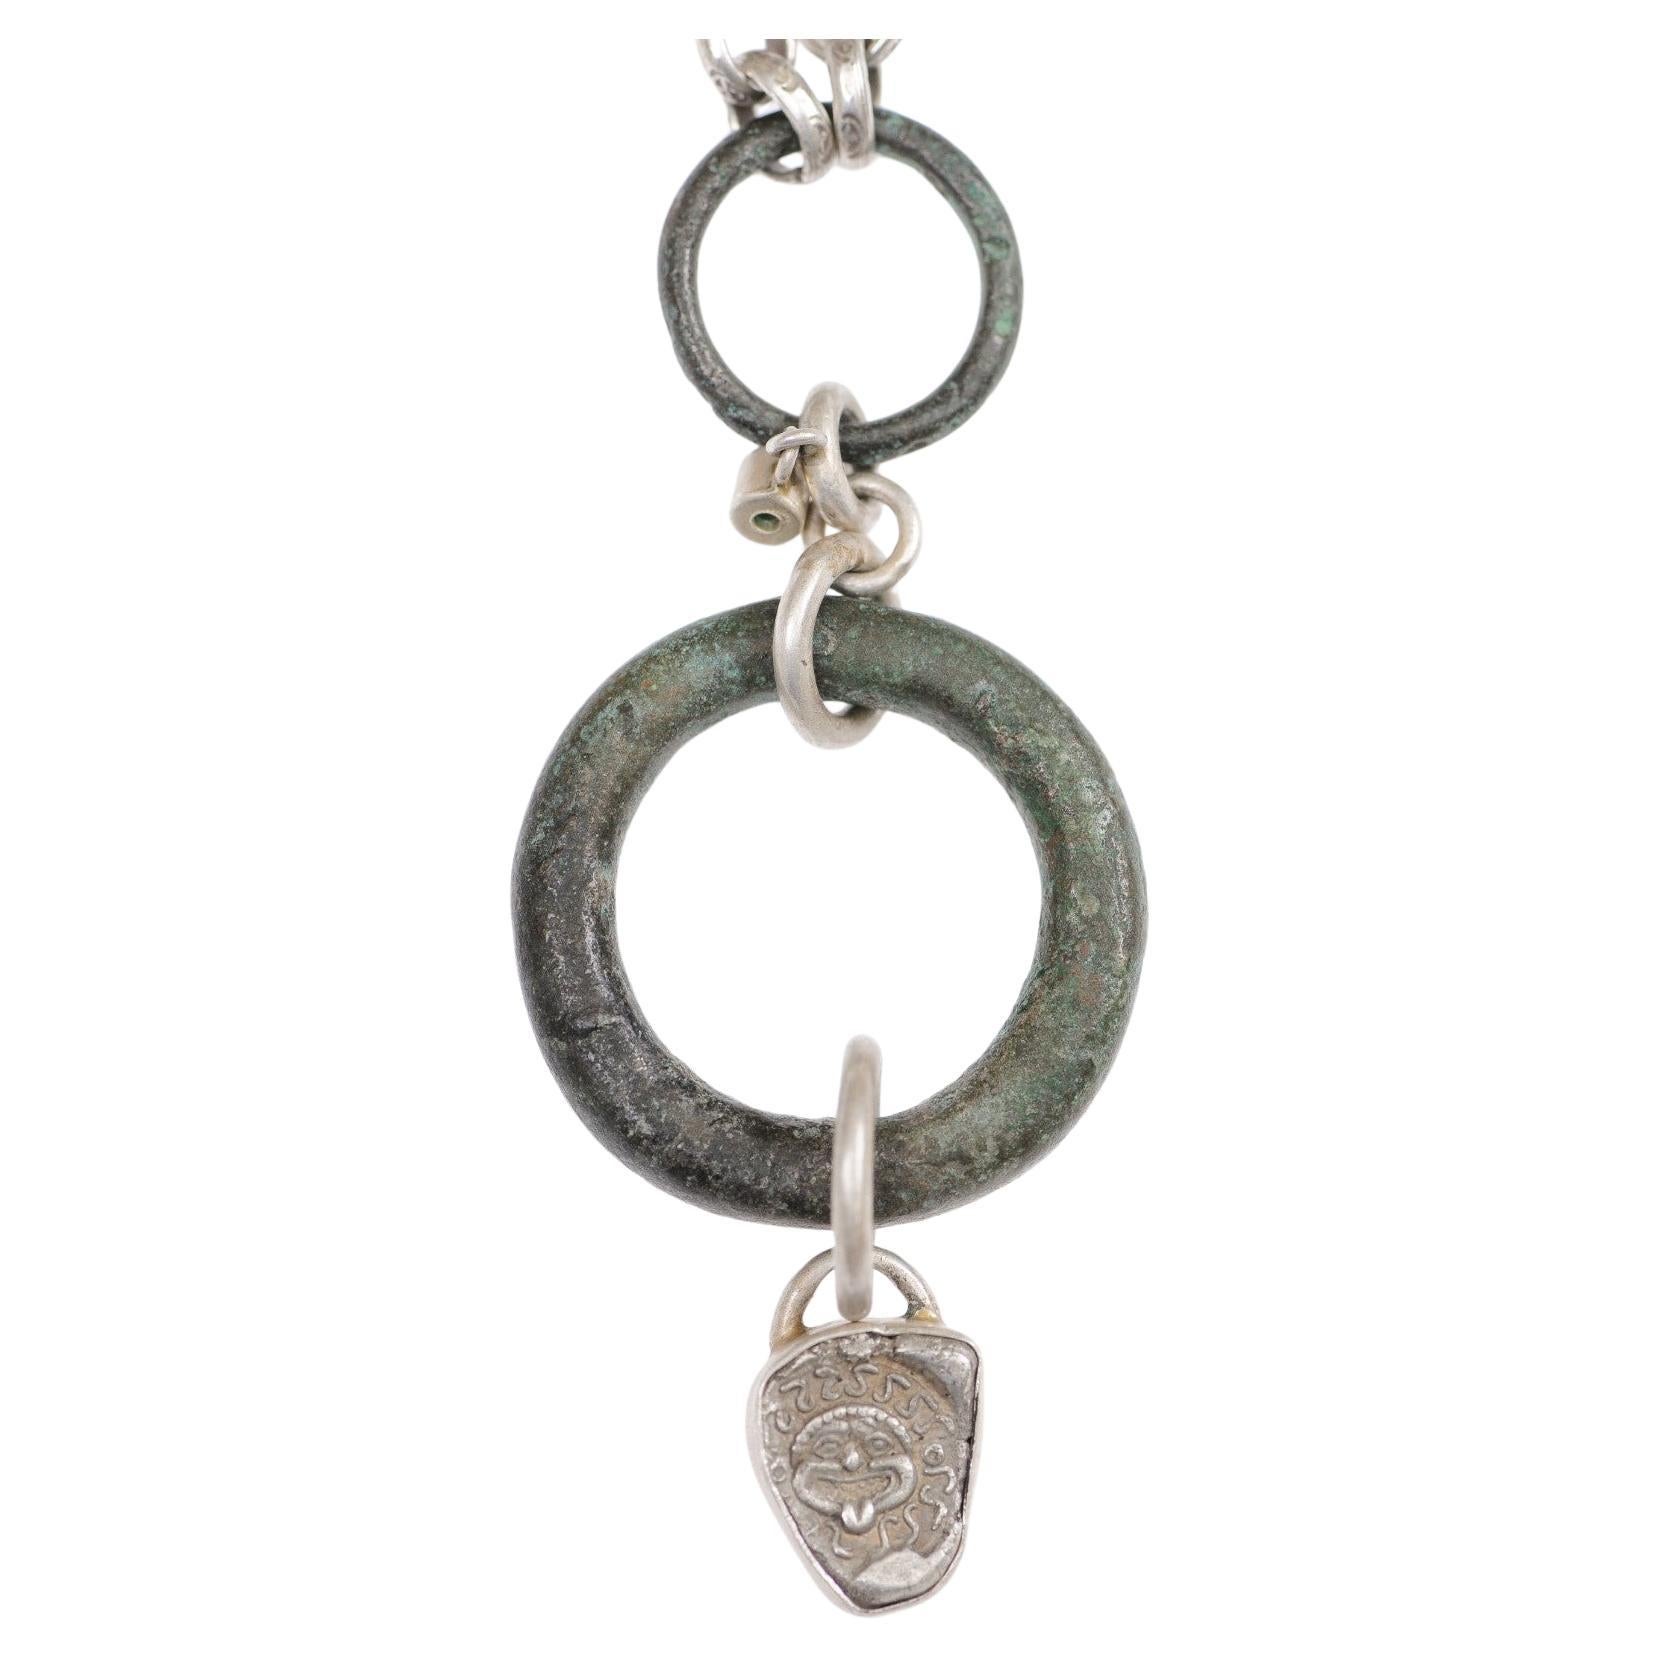 Tiered Pendant in bronze, w/emerald and drachm (coin) on Sterling Silver Chain For Sale